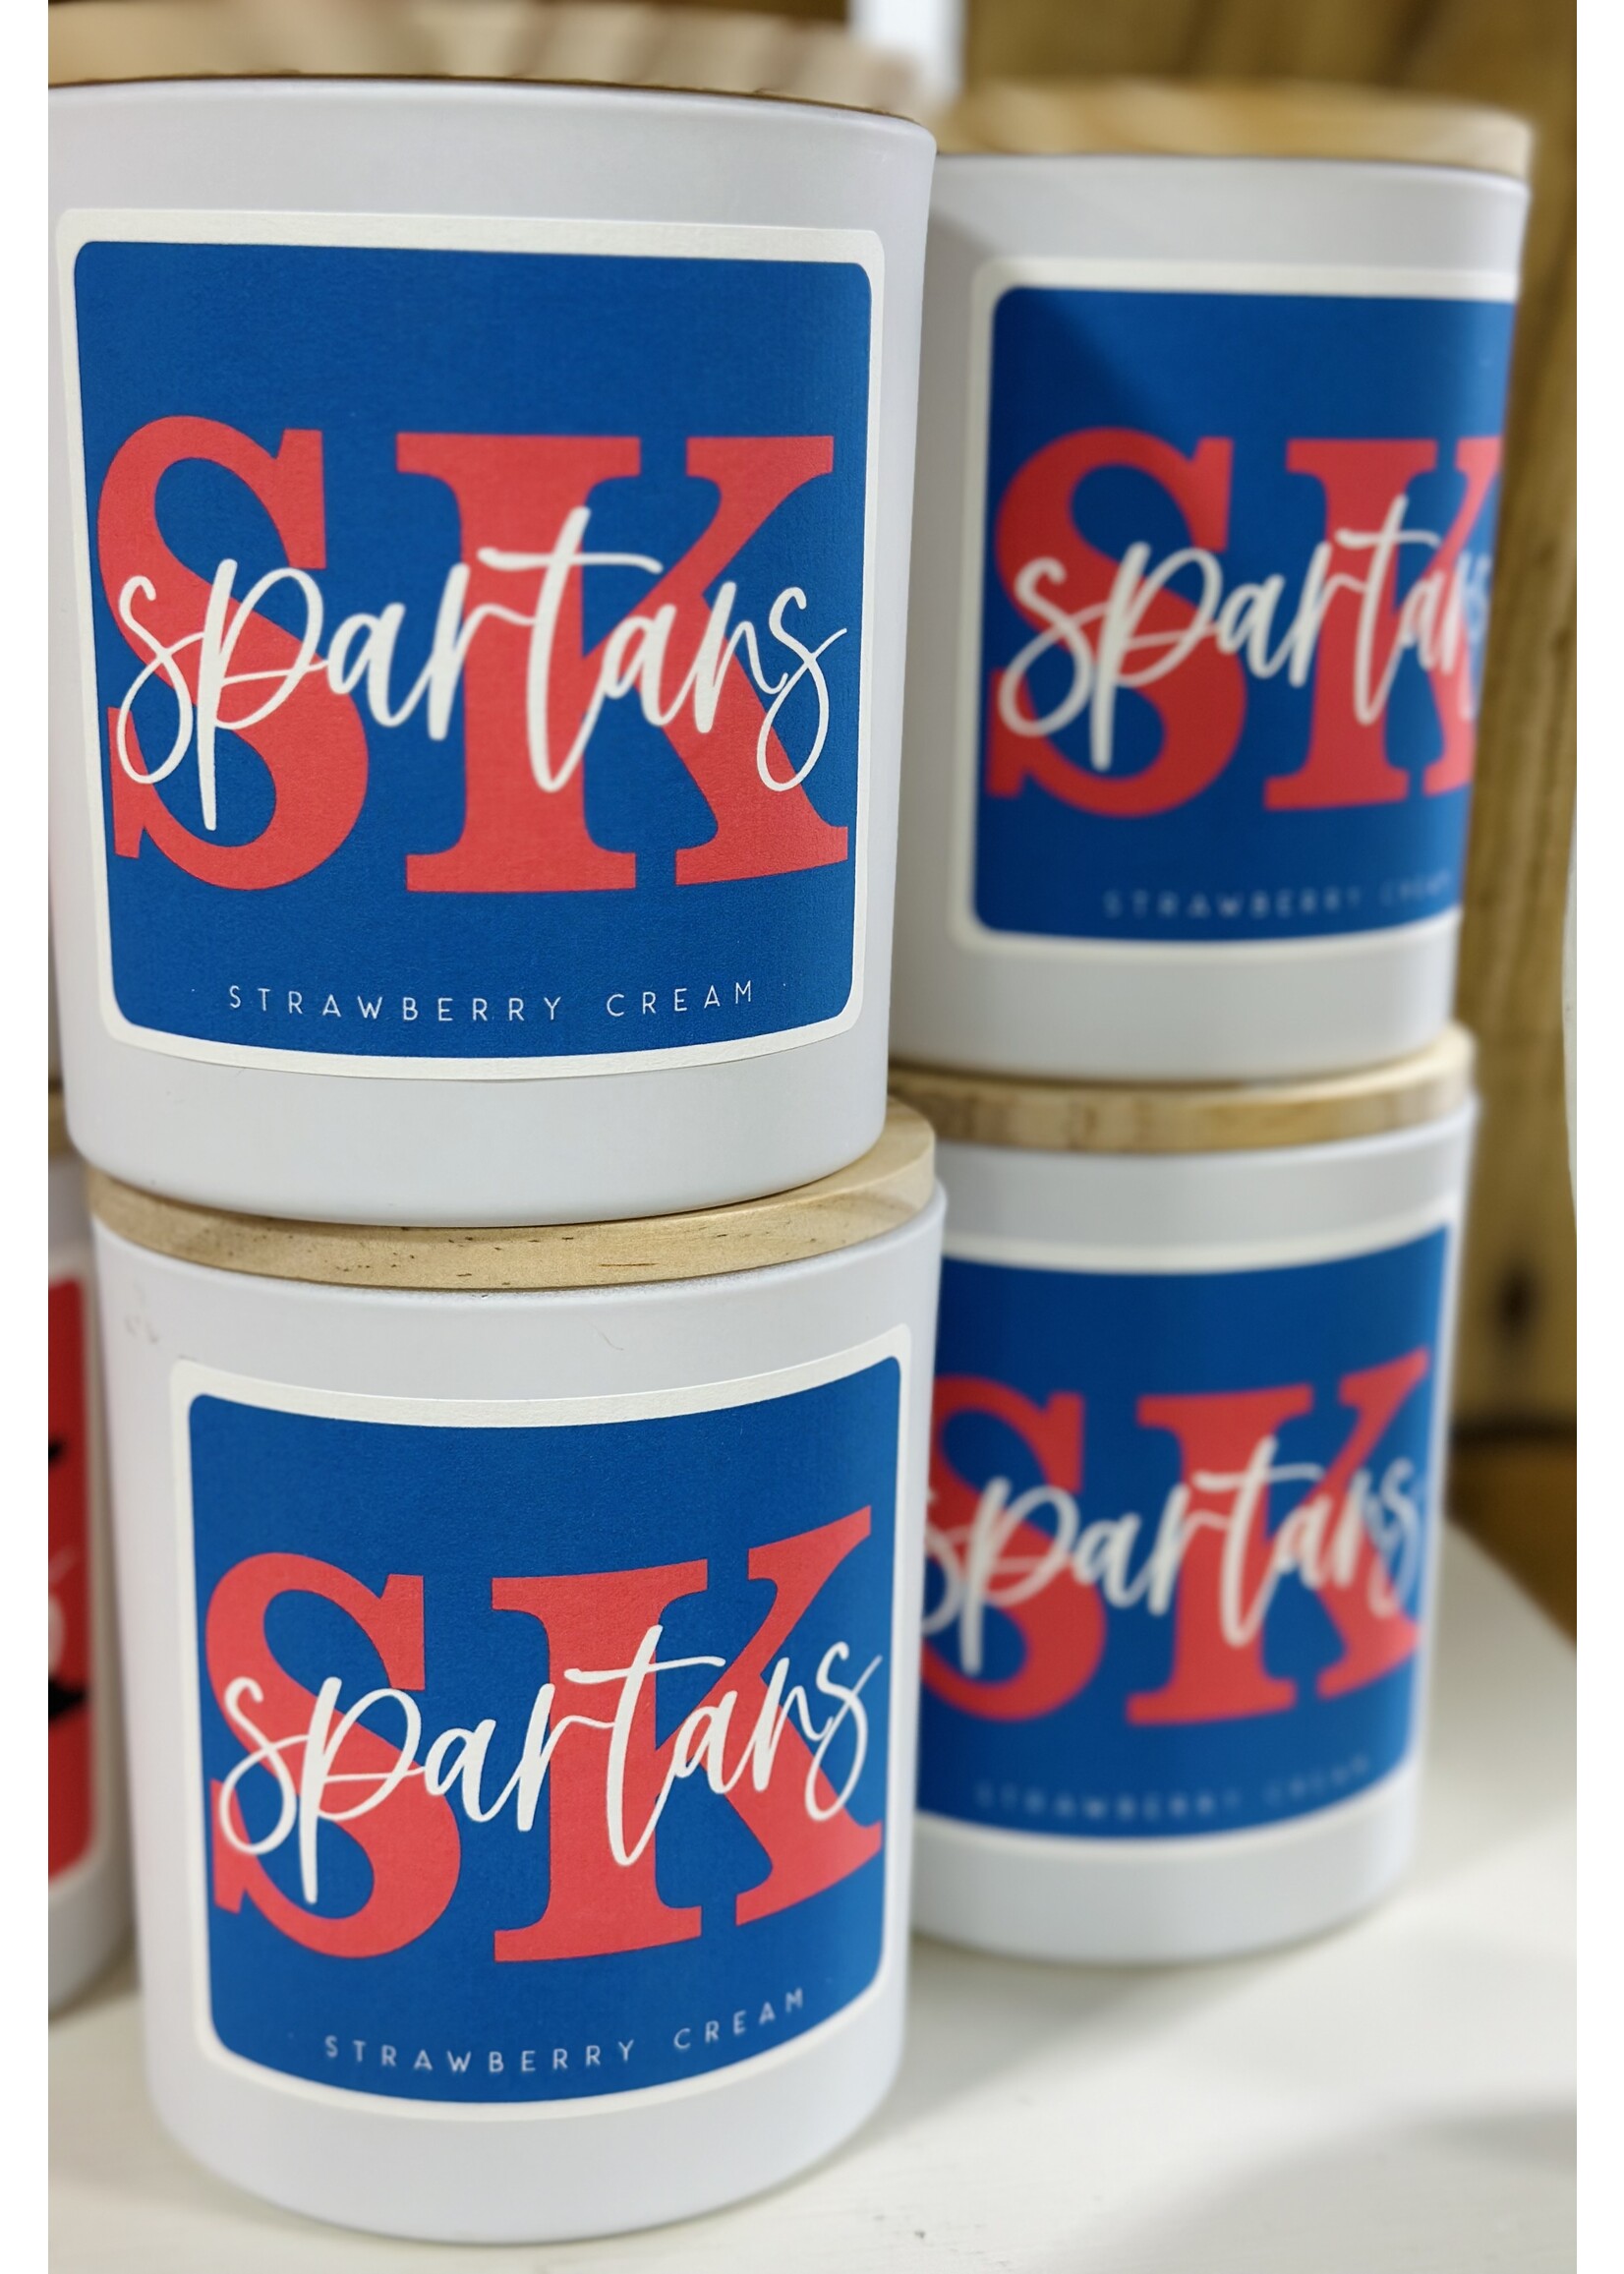 South Knox Spartans School Spirit Edition Candle